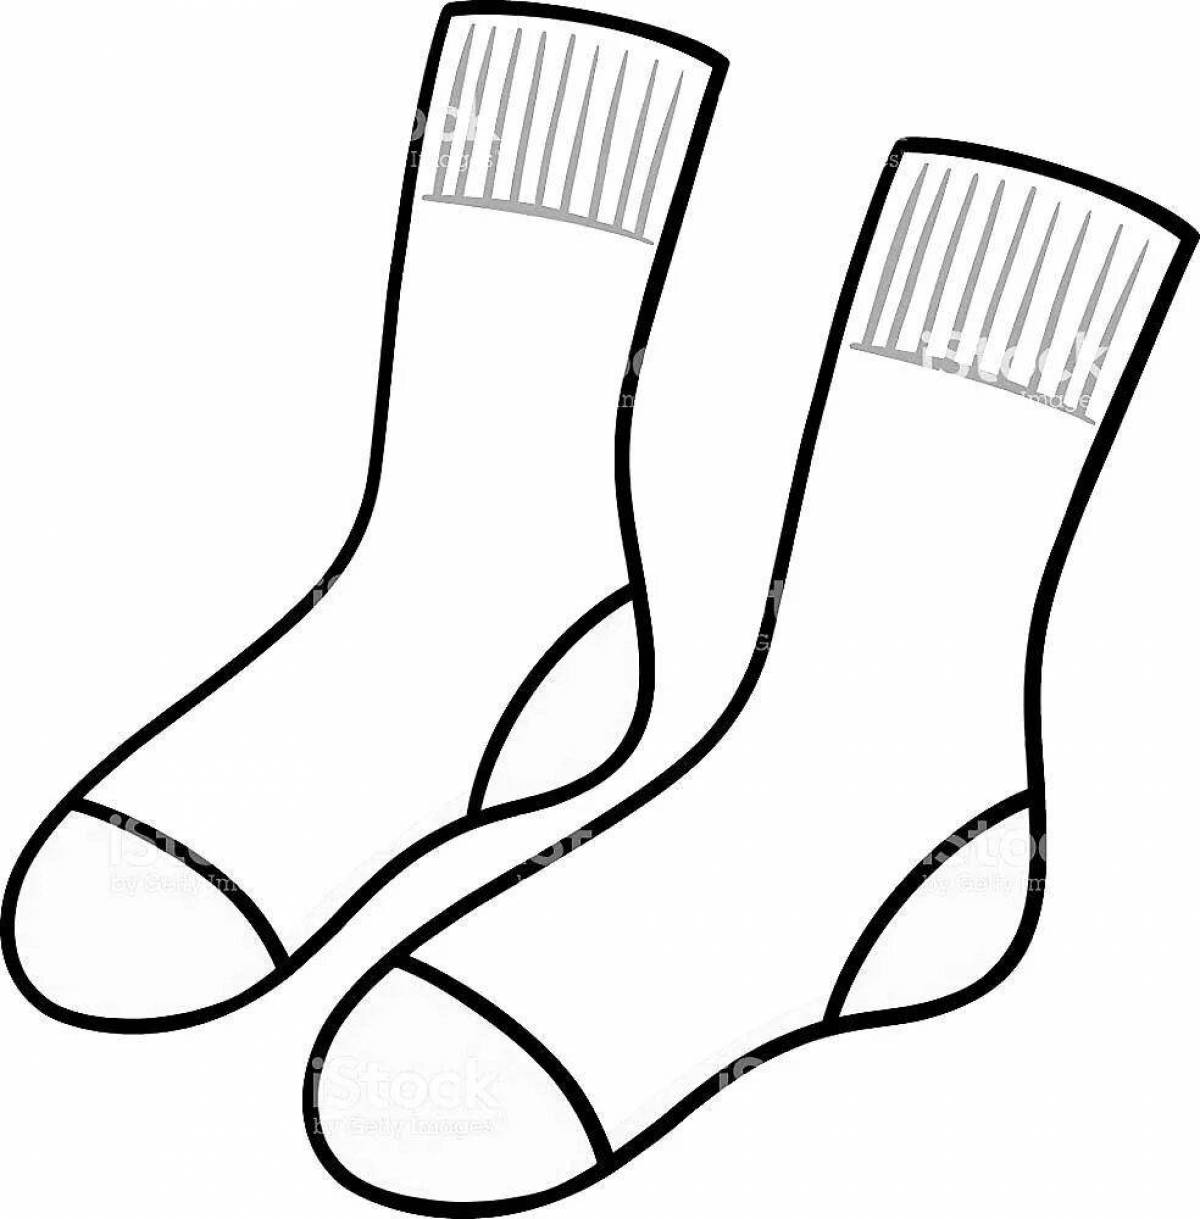 Trendy socks coloring page for beginners